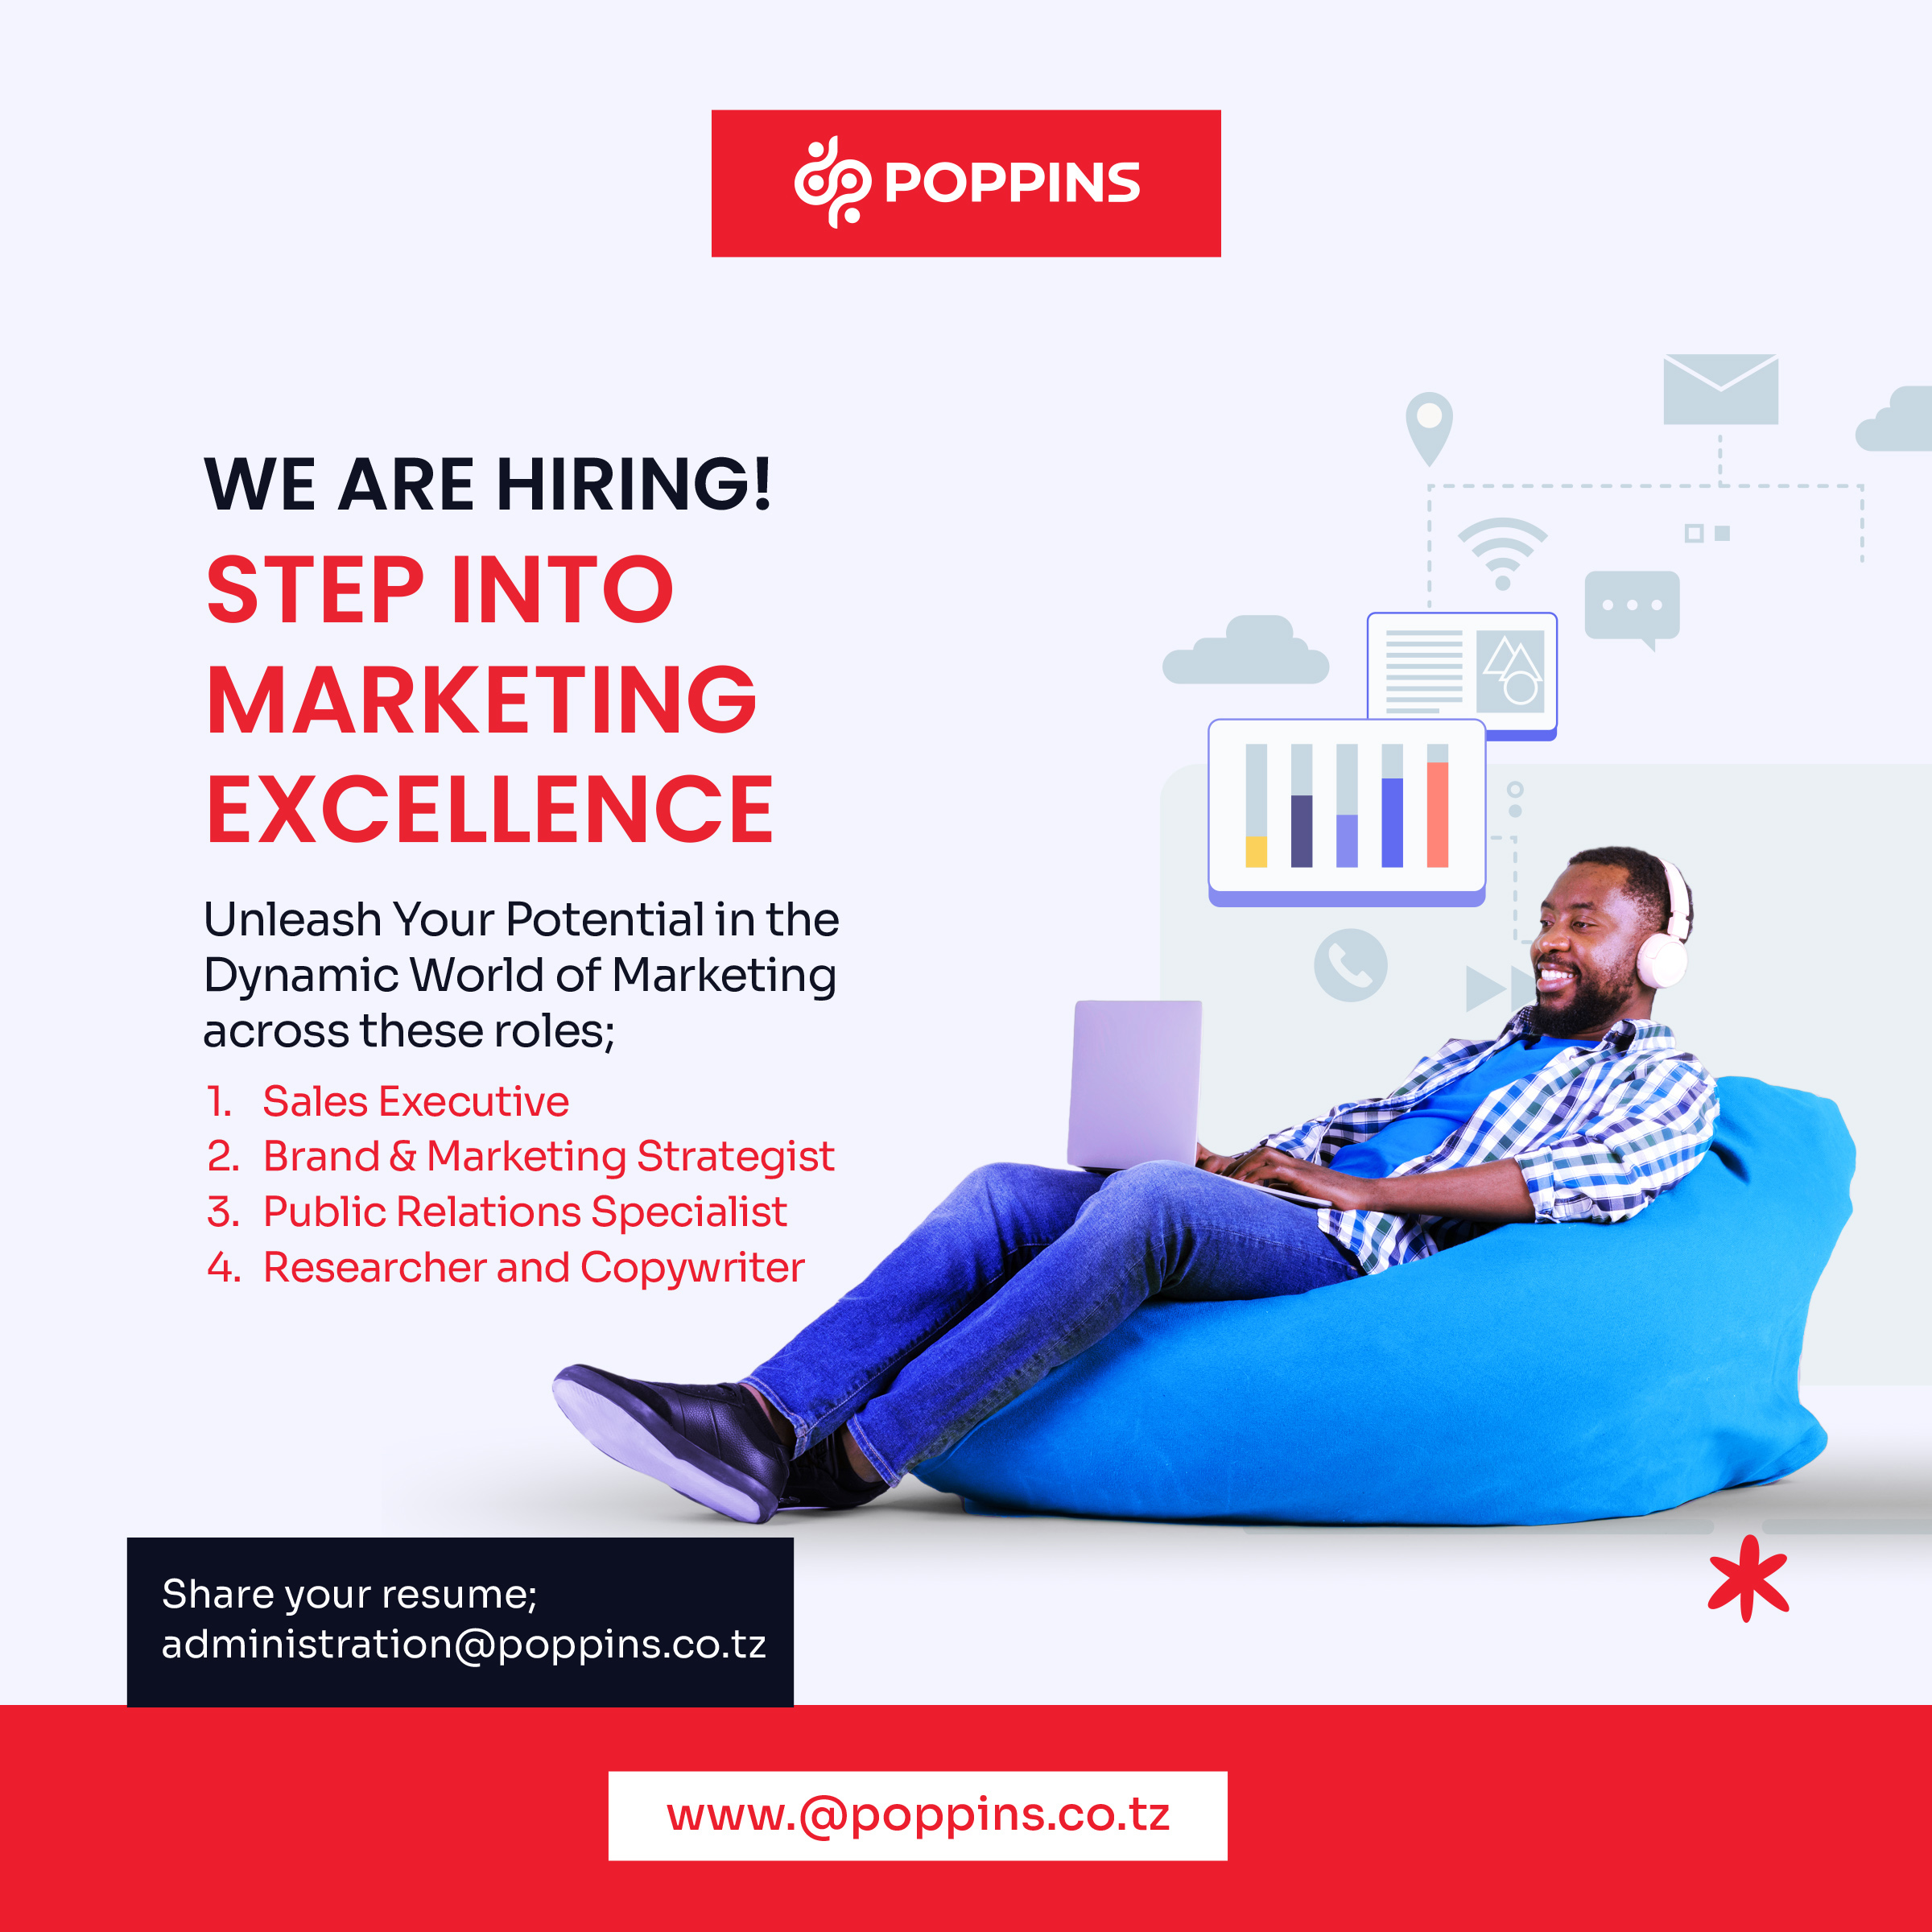 JOIN THE TEAM AT THE LEADING CREATIVE AGENCY IN TANZANIA